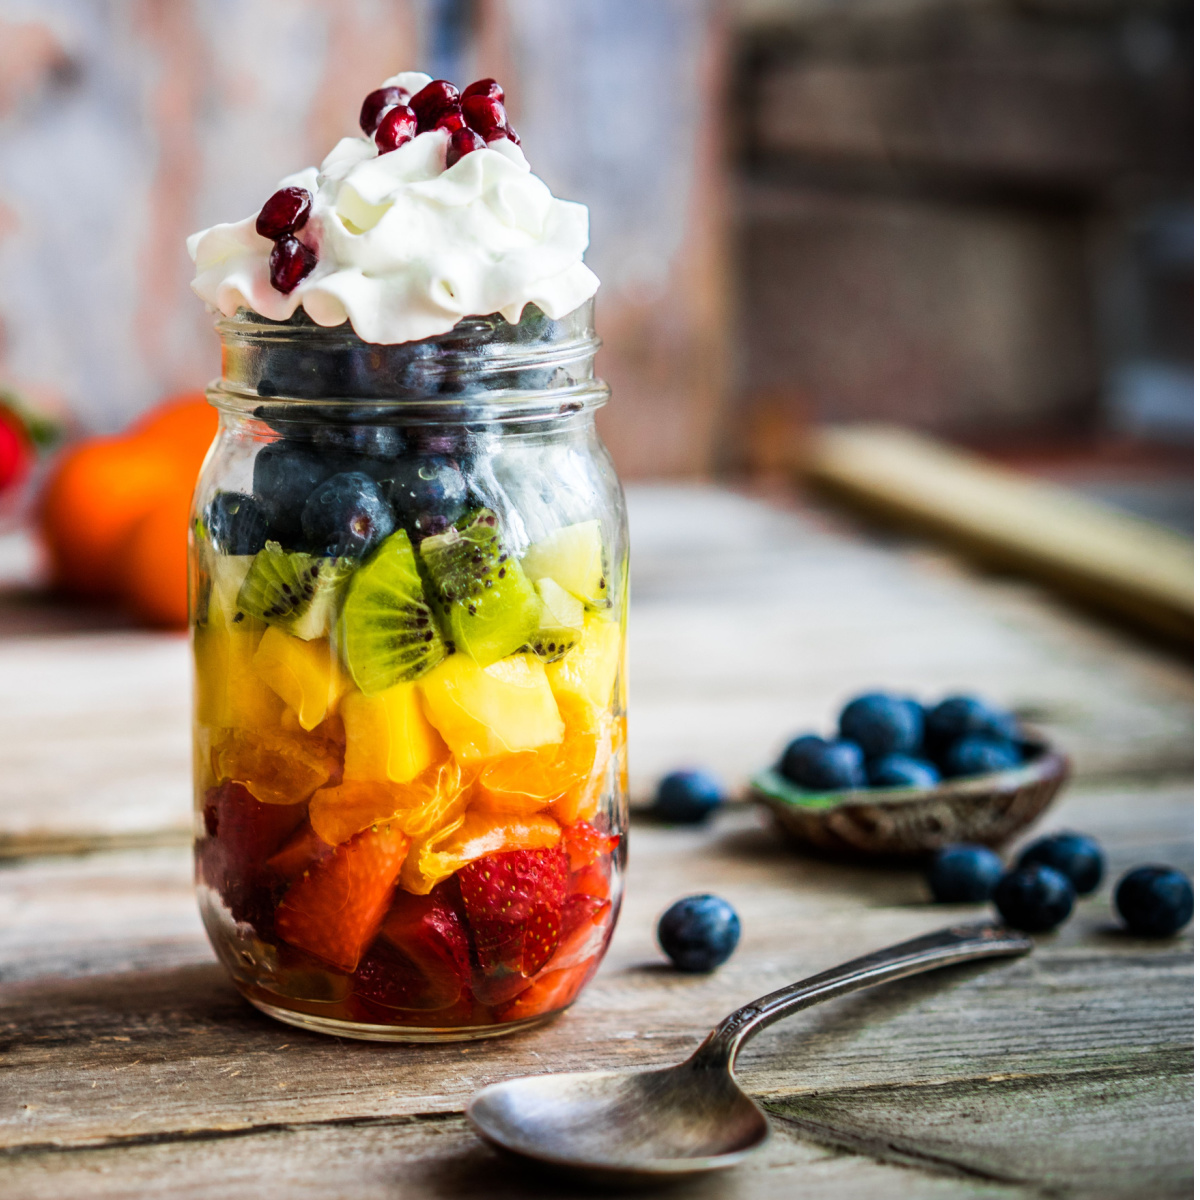 jar of fruit salad topped with whipped cream